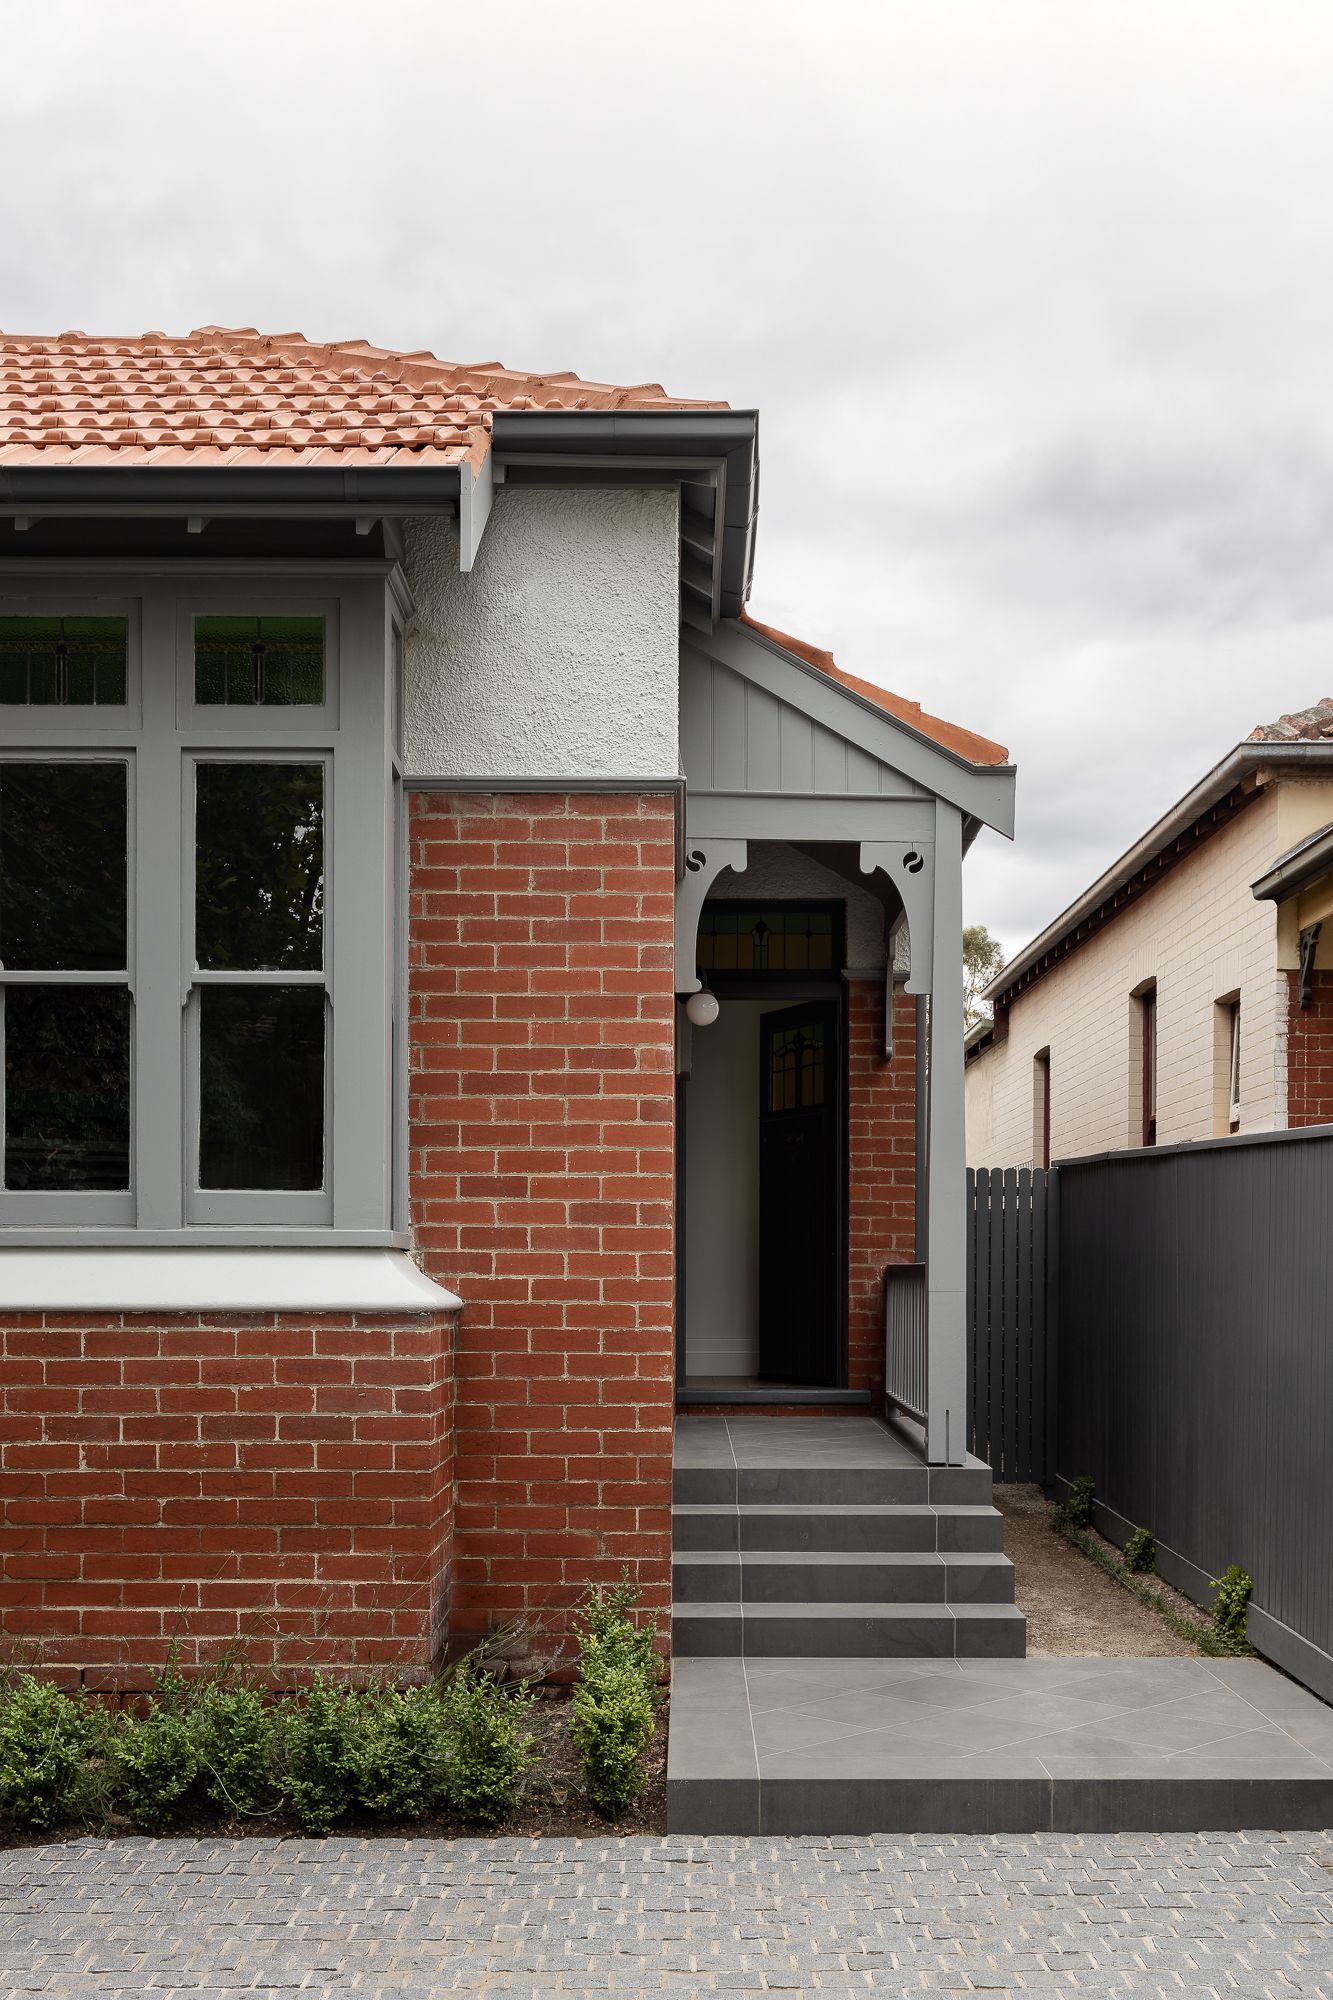 Ripponlea House by Luke Fry Architecture and Interior Design. Close up facade elevation of edwardian style home